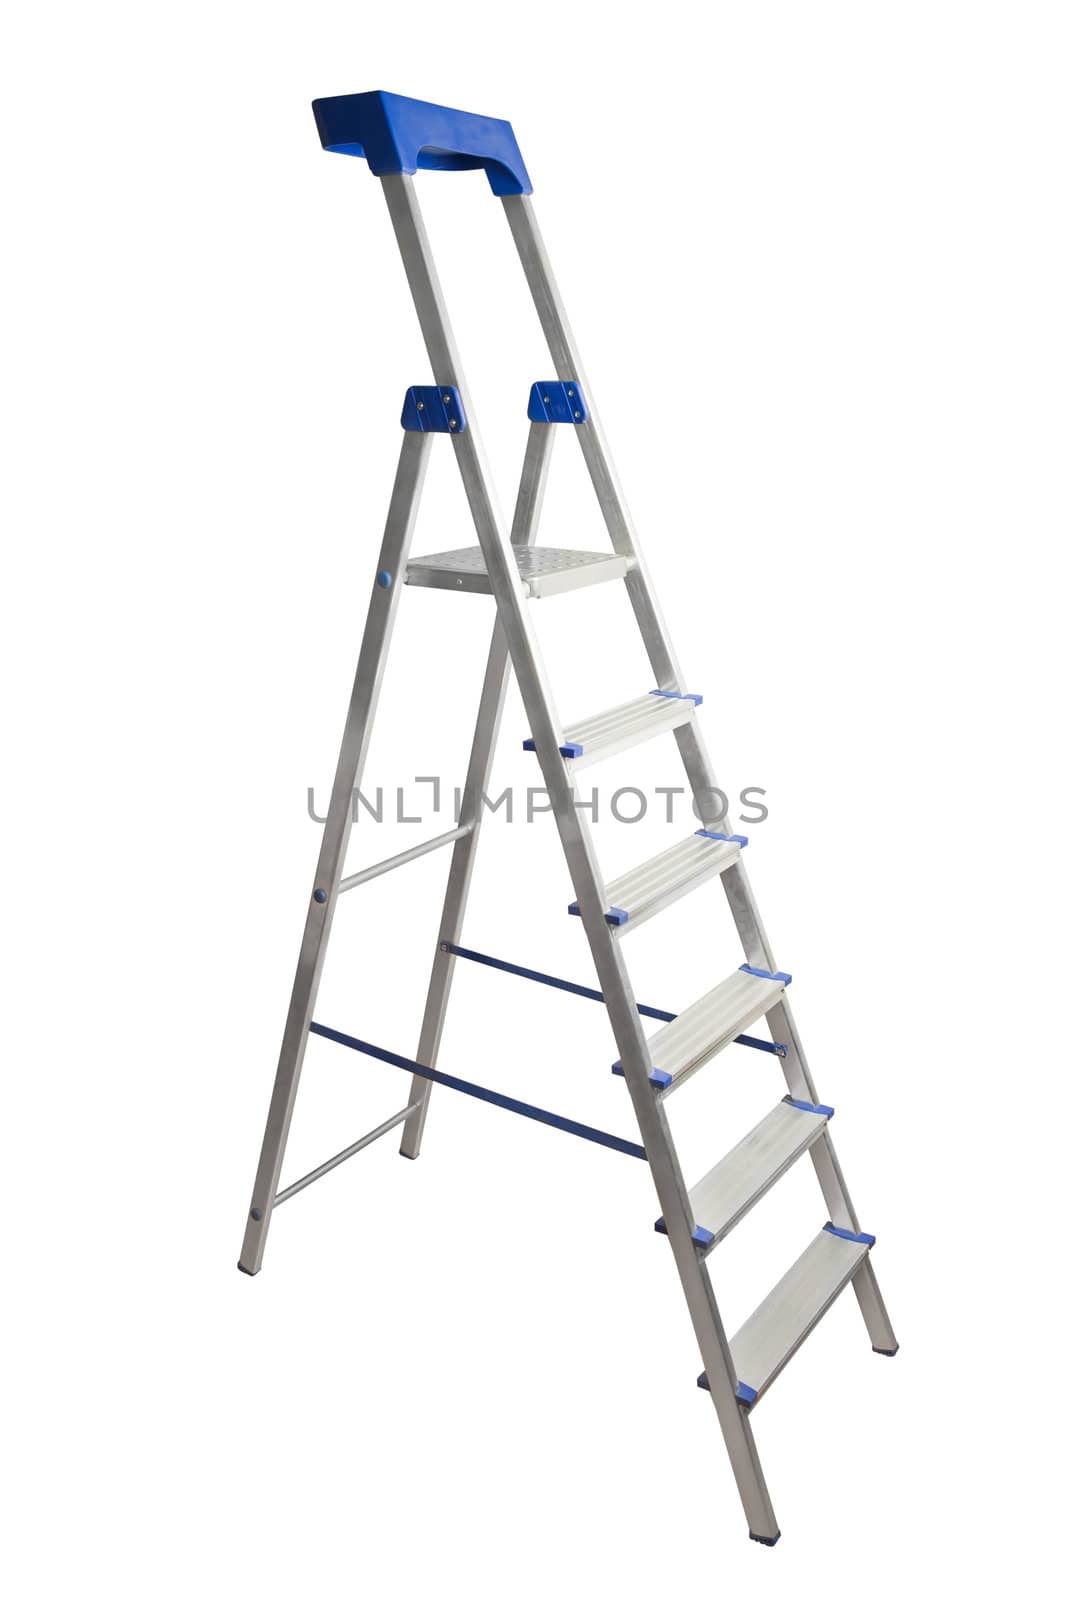 Step ladder isolated on white background